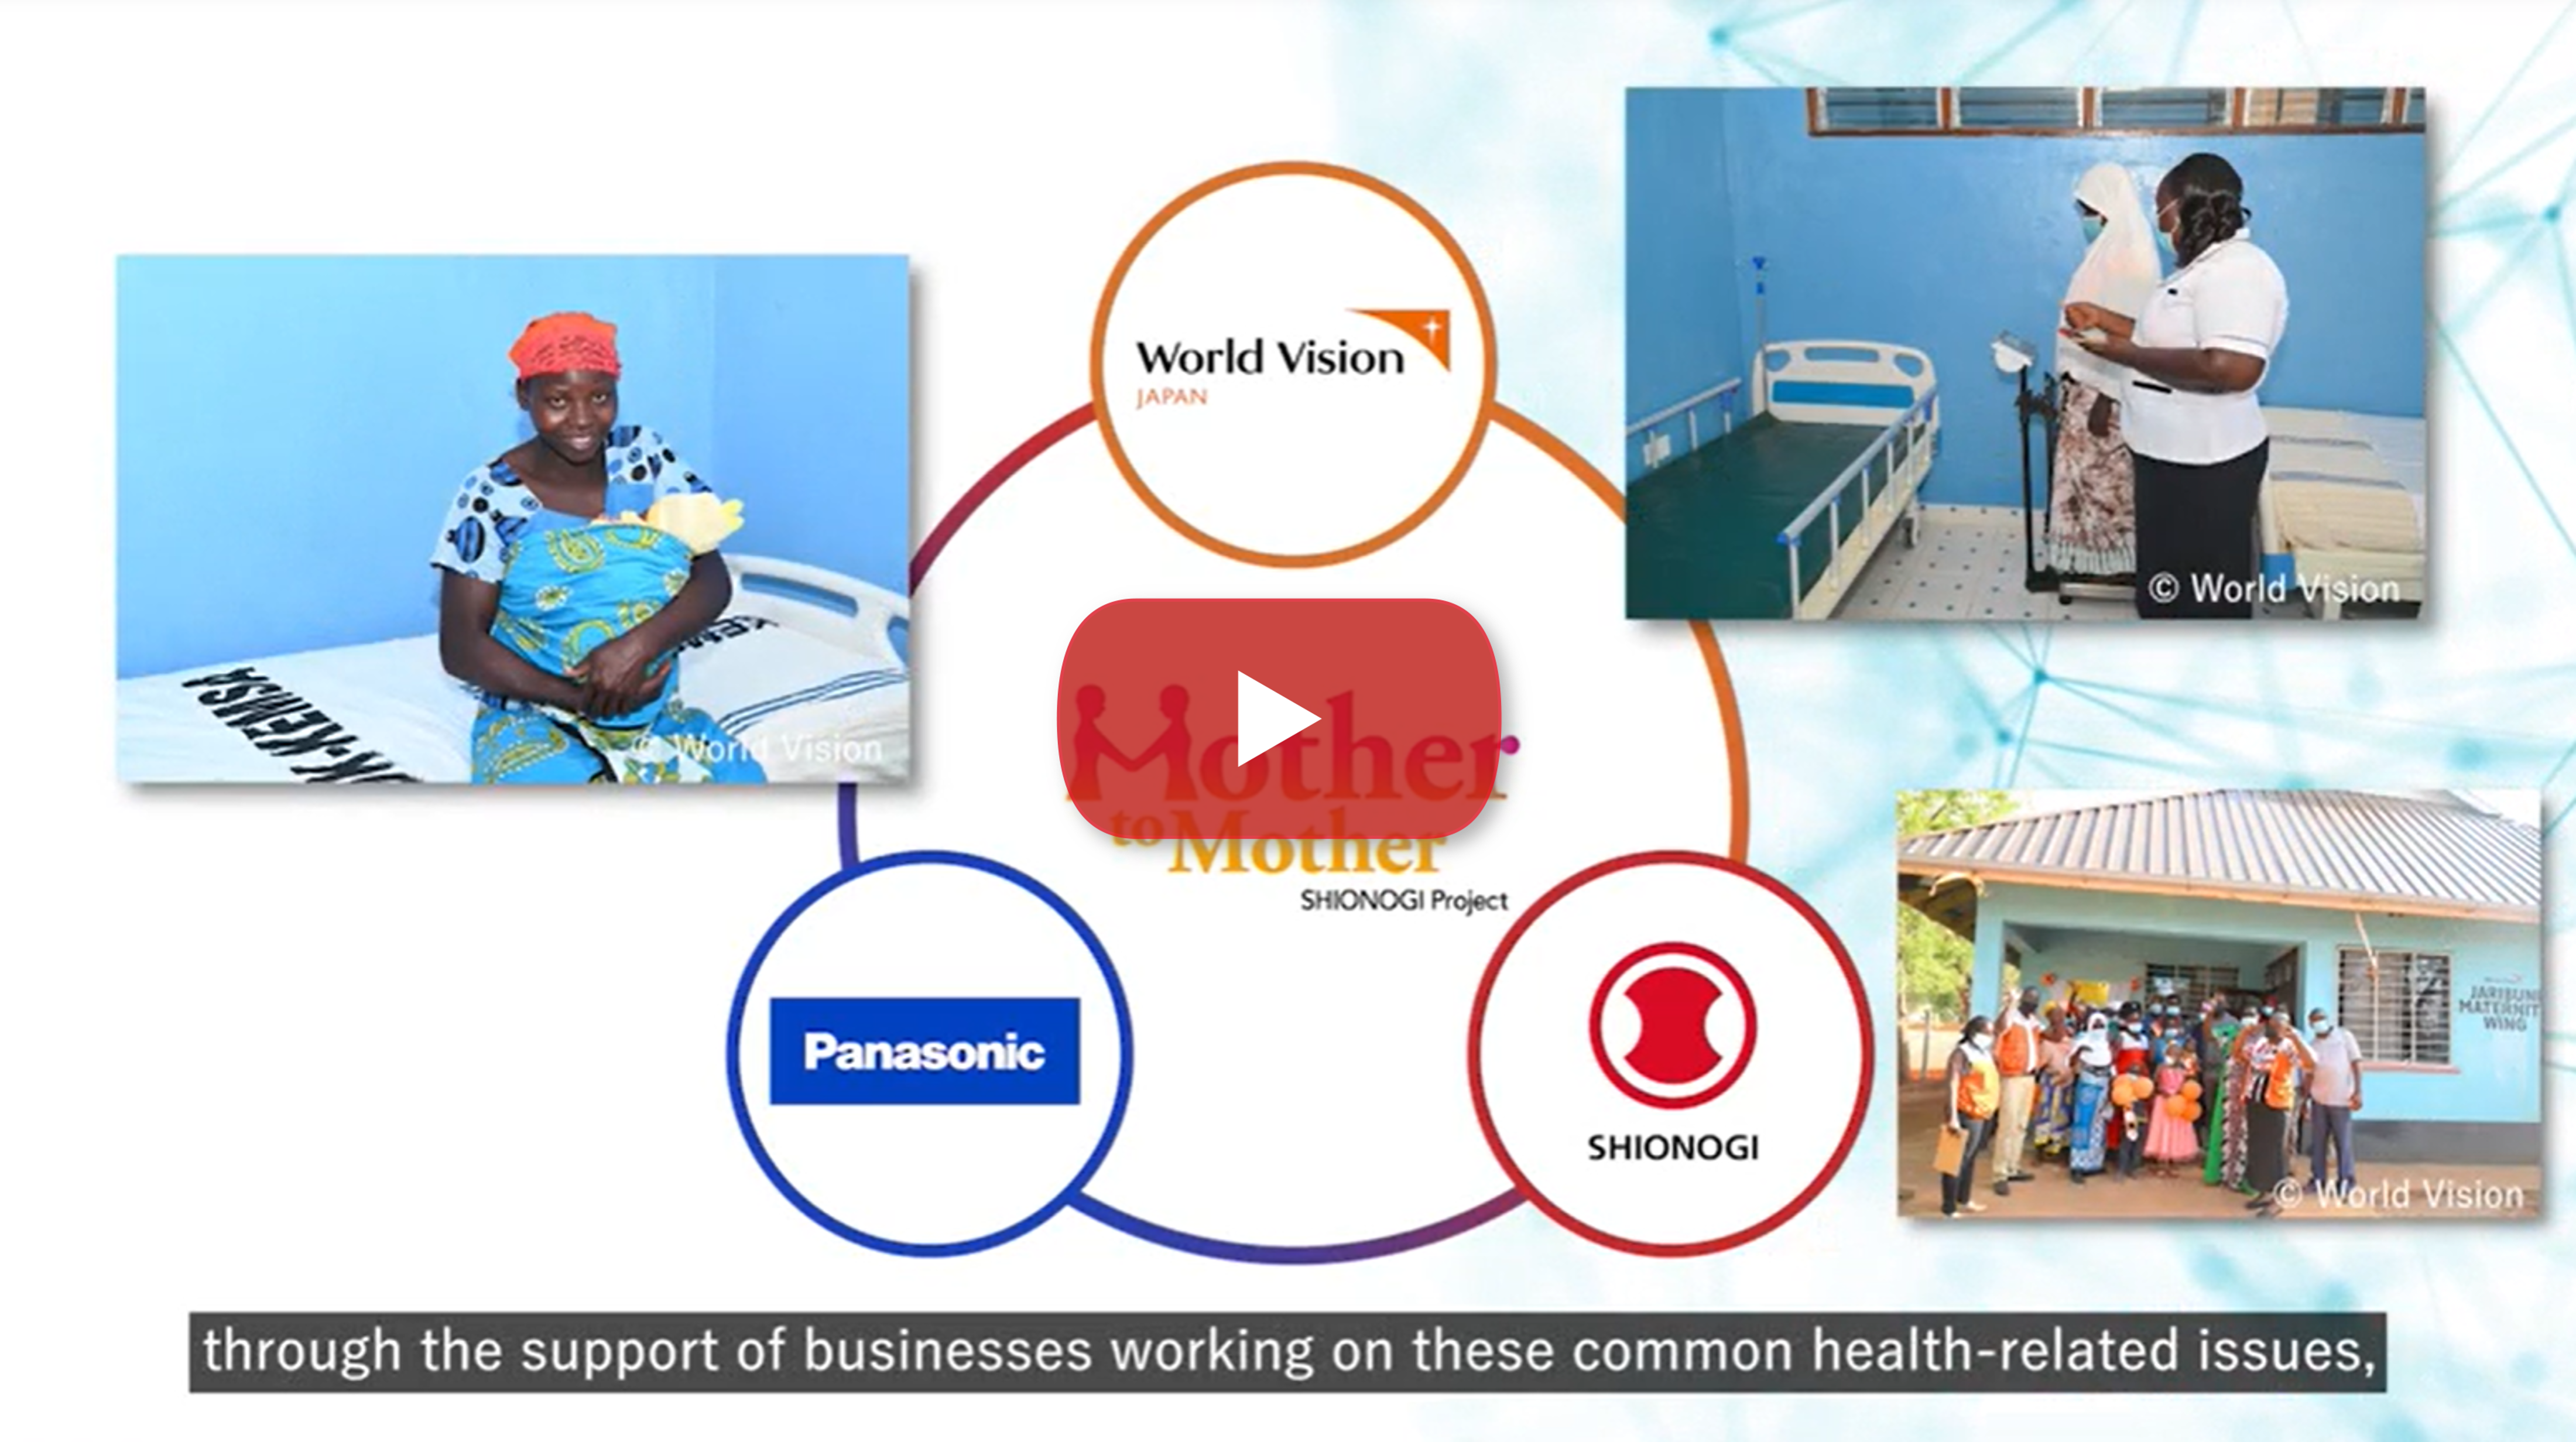 The YouTube video link of the project efforts in Kilifi country, Kenya